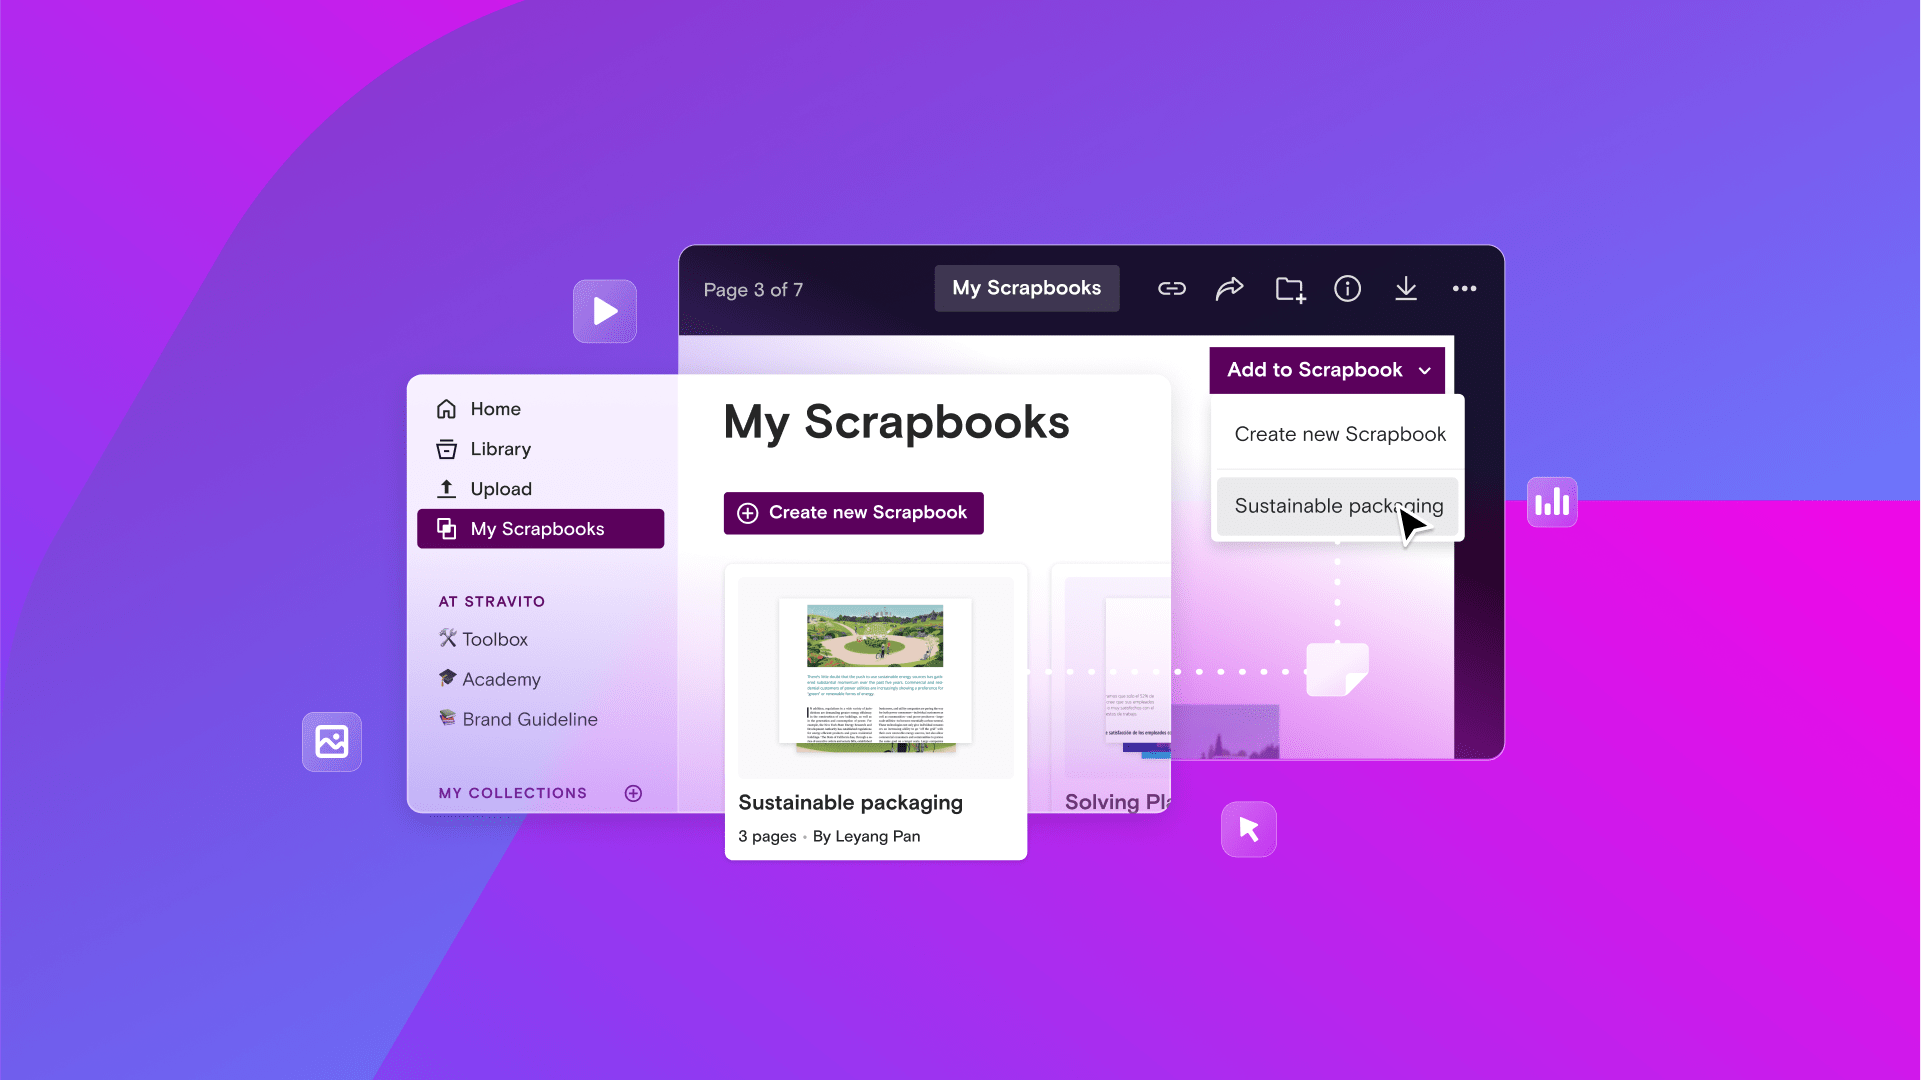 Scrapbook by Stravito